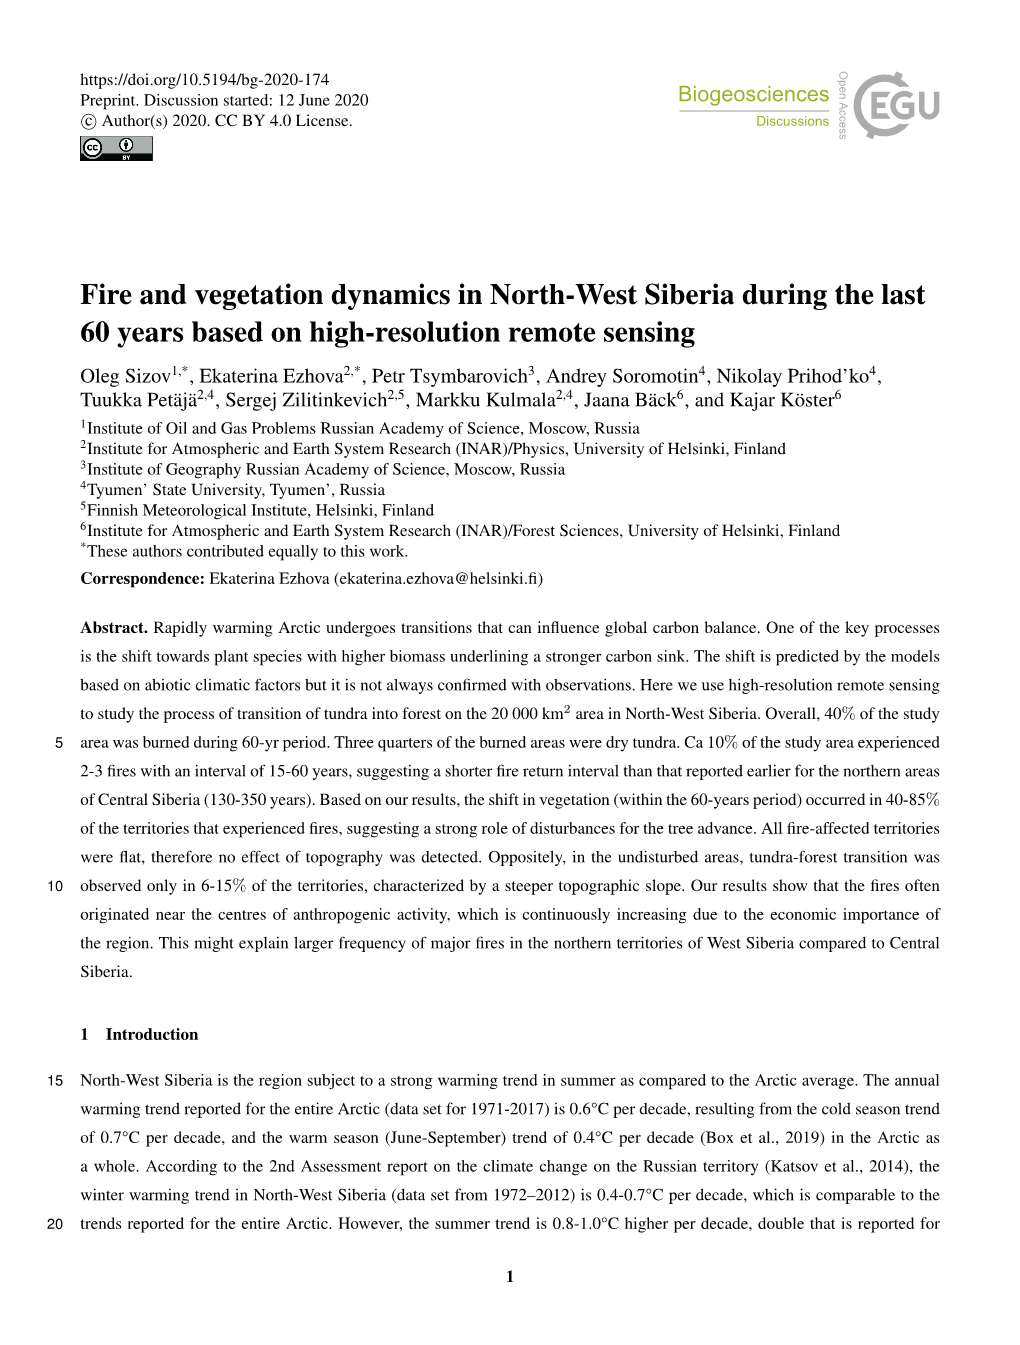 Fire and Vegetation Dynamics in North-West Siberia During the Last